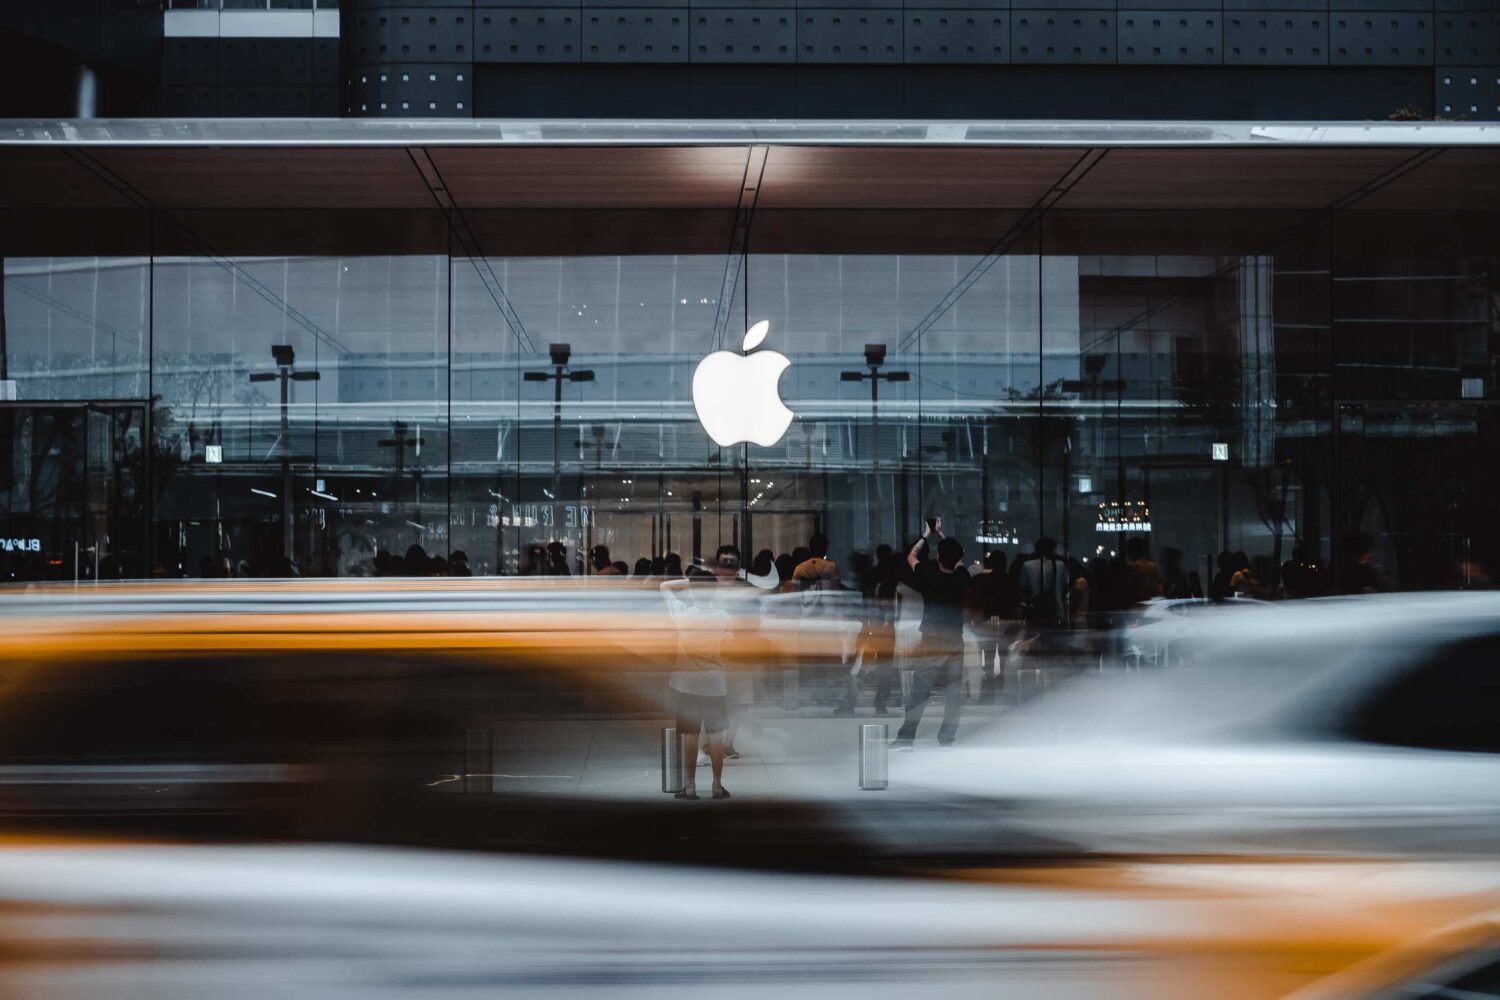 Exterior of Apple's retail store in Taipei's A13 Xinyi district with passing cars on the street shot with long exposure to appear blurred as if speeding